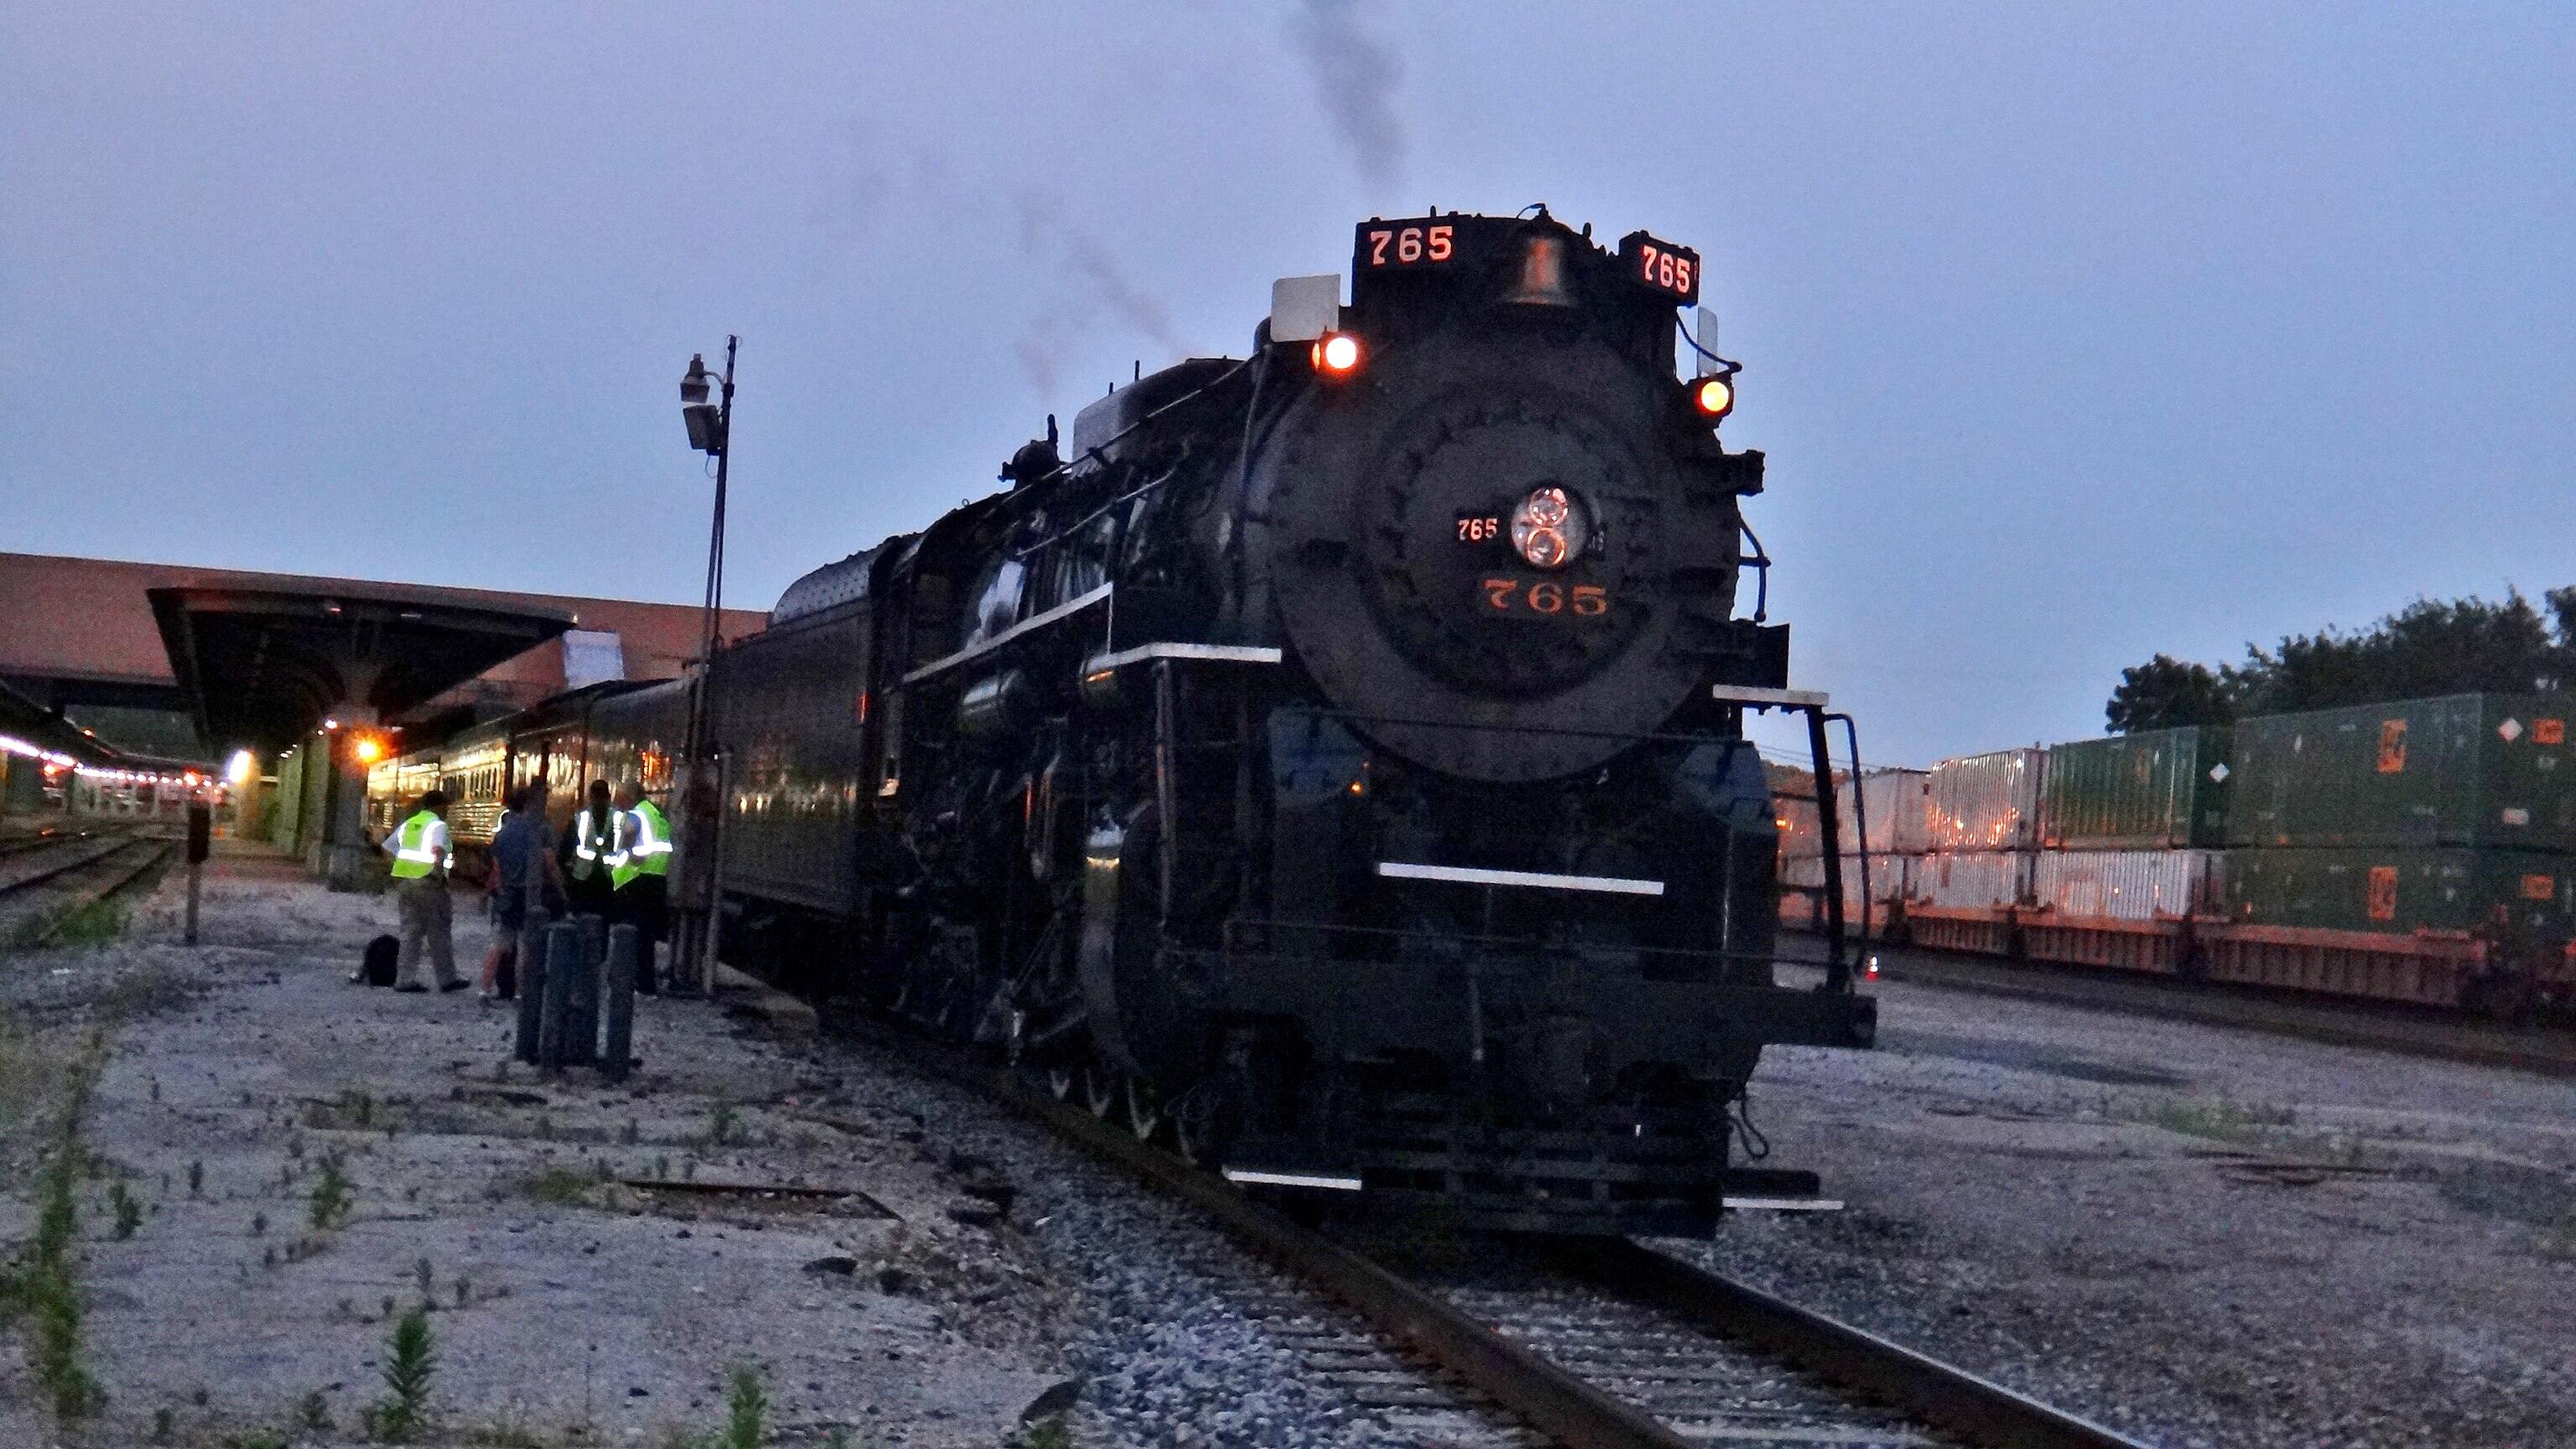 Nickel Plate Steam Engine No. 765 parked at the Central Union Terminal in Toledo Ohio.